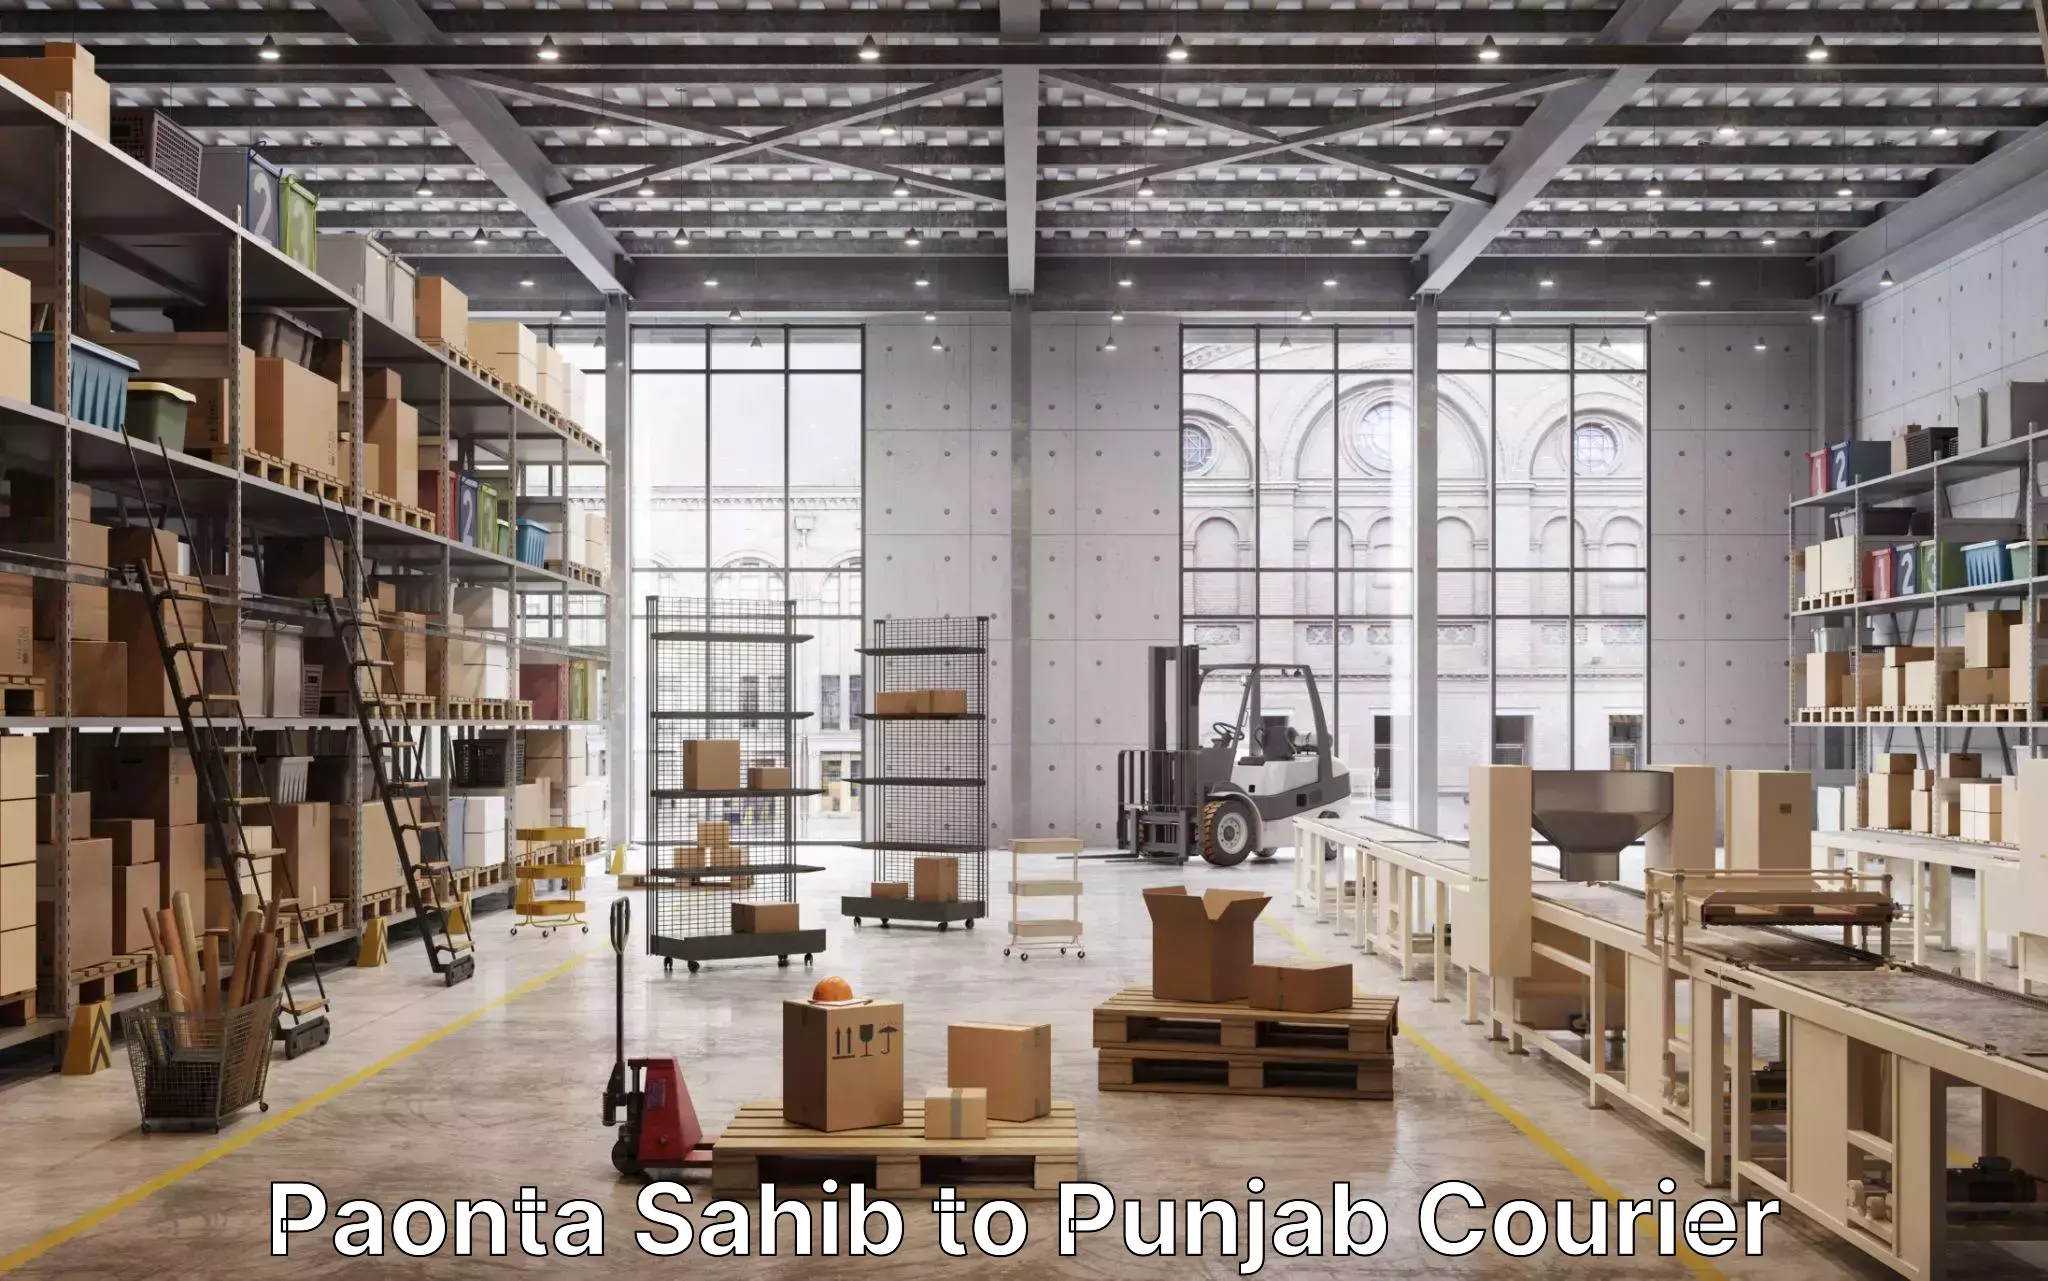 Furniture delivery service Paonta Sahib to Firozpur